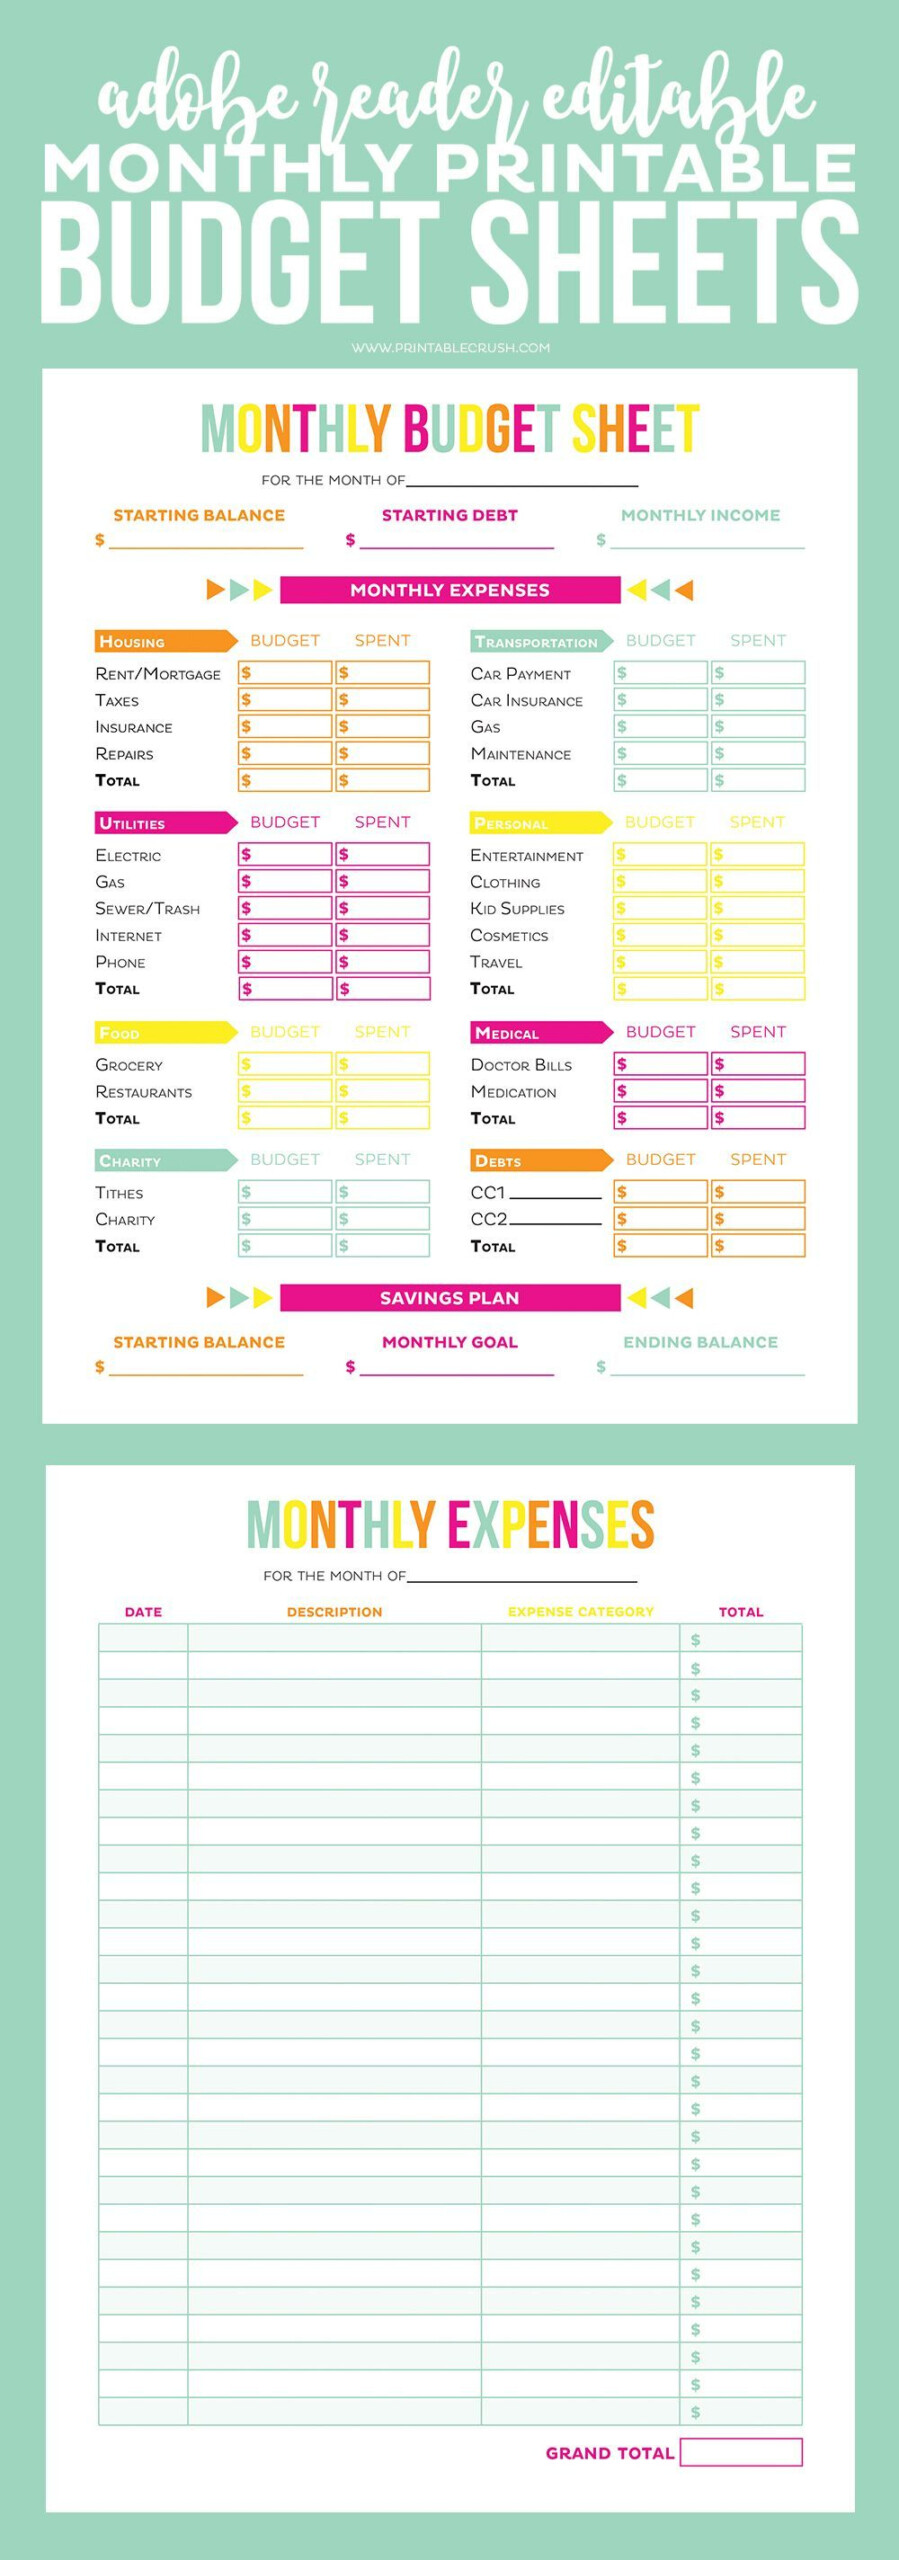 Get Your Finances In Order With These Editable Printable Budget Sheets